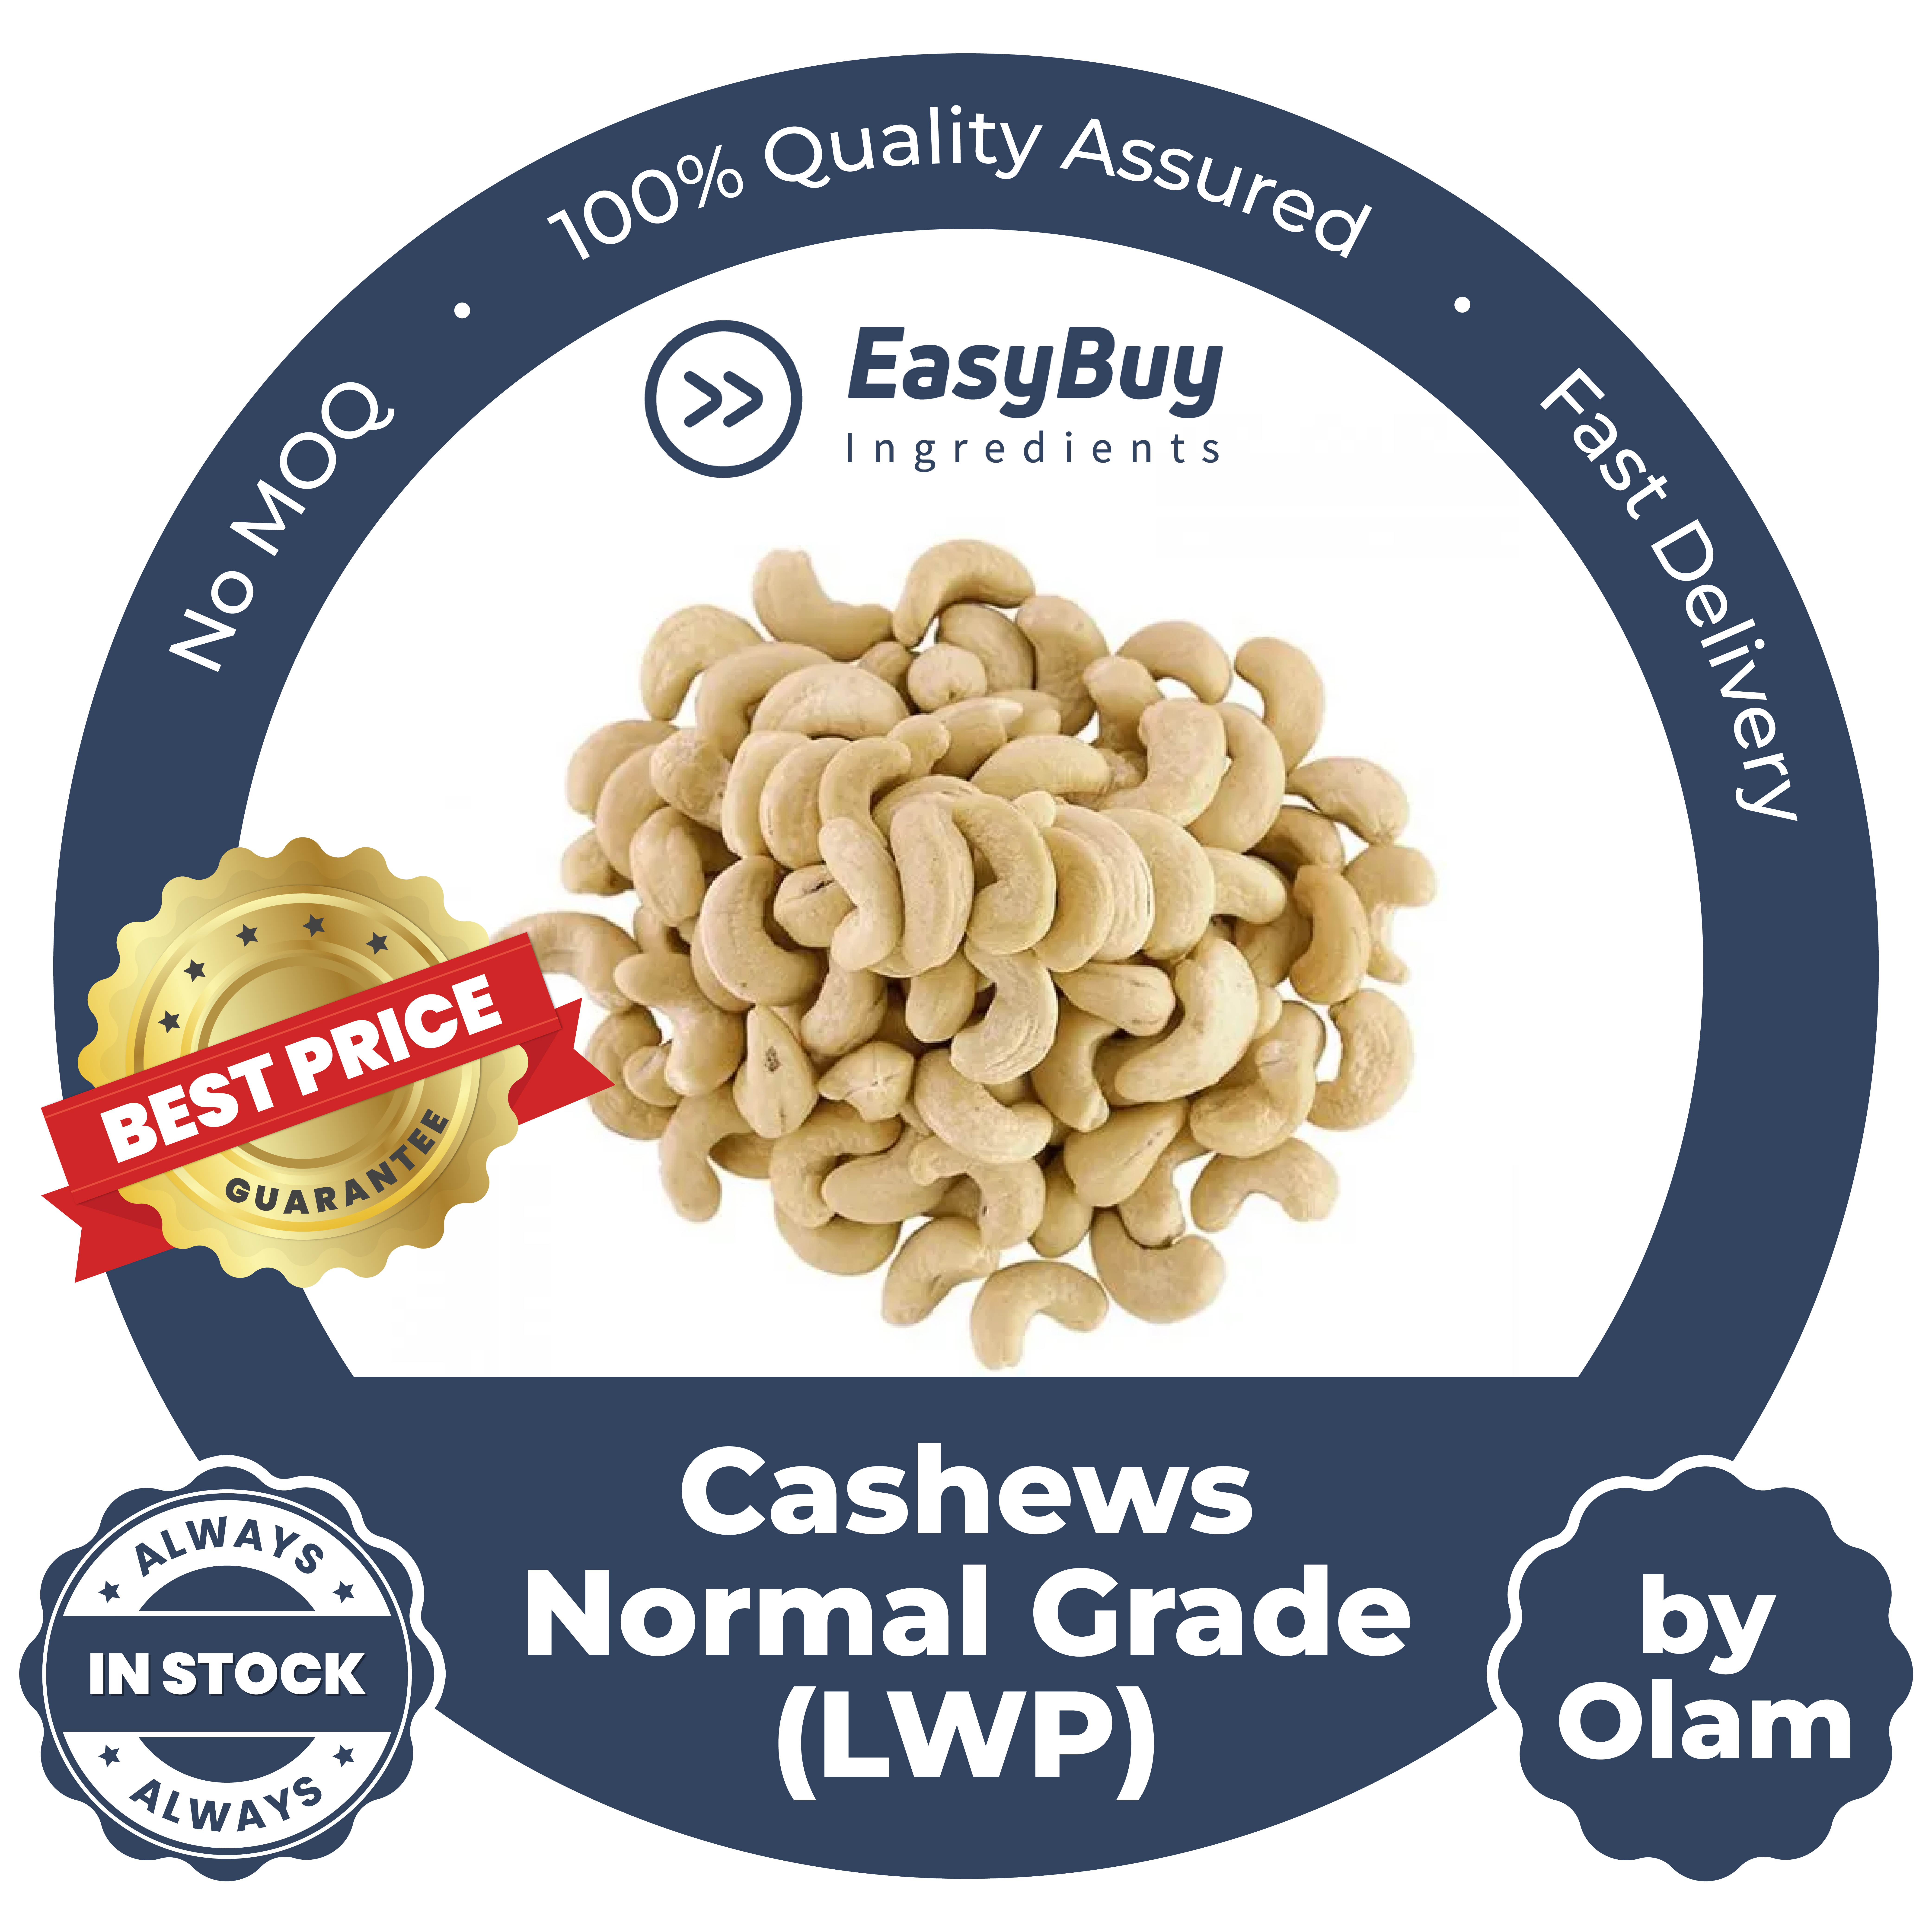 Cashews - Normal grade (LWP) by Olam